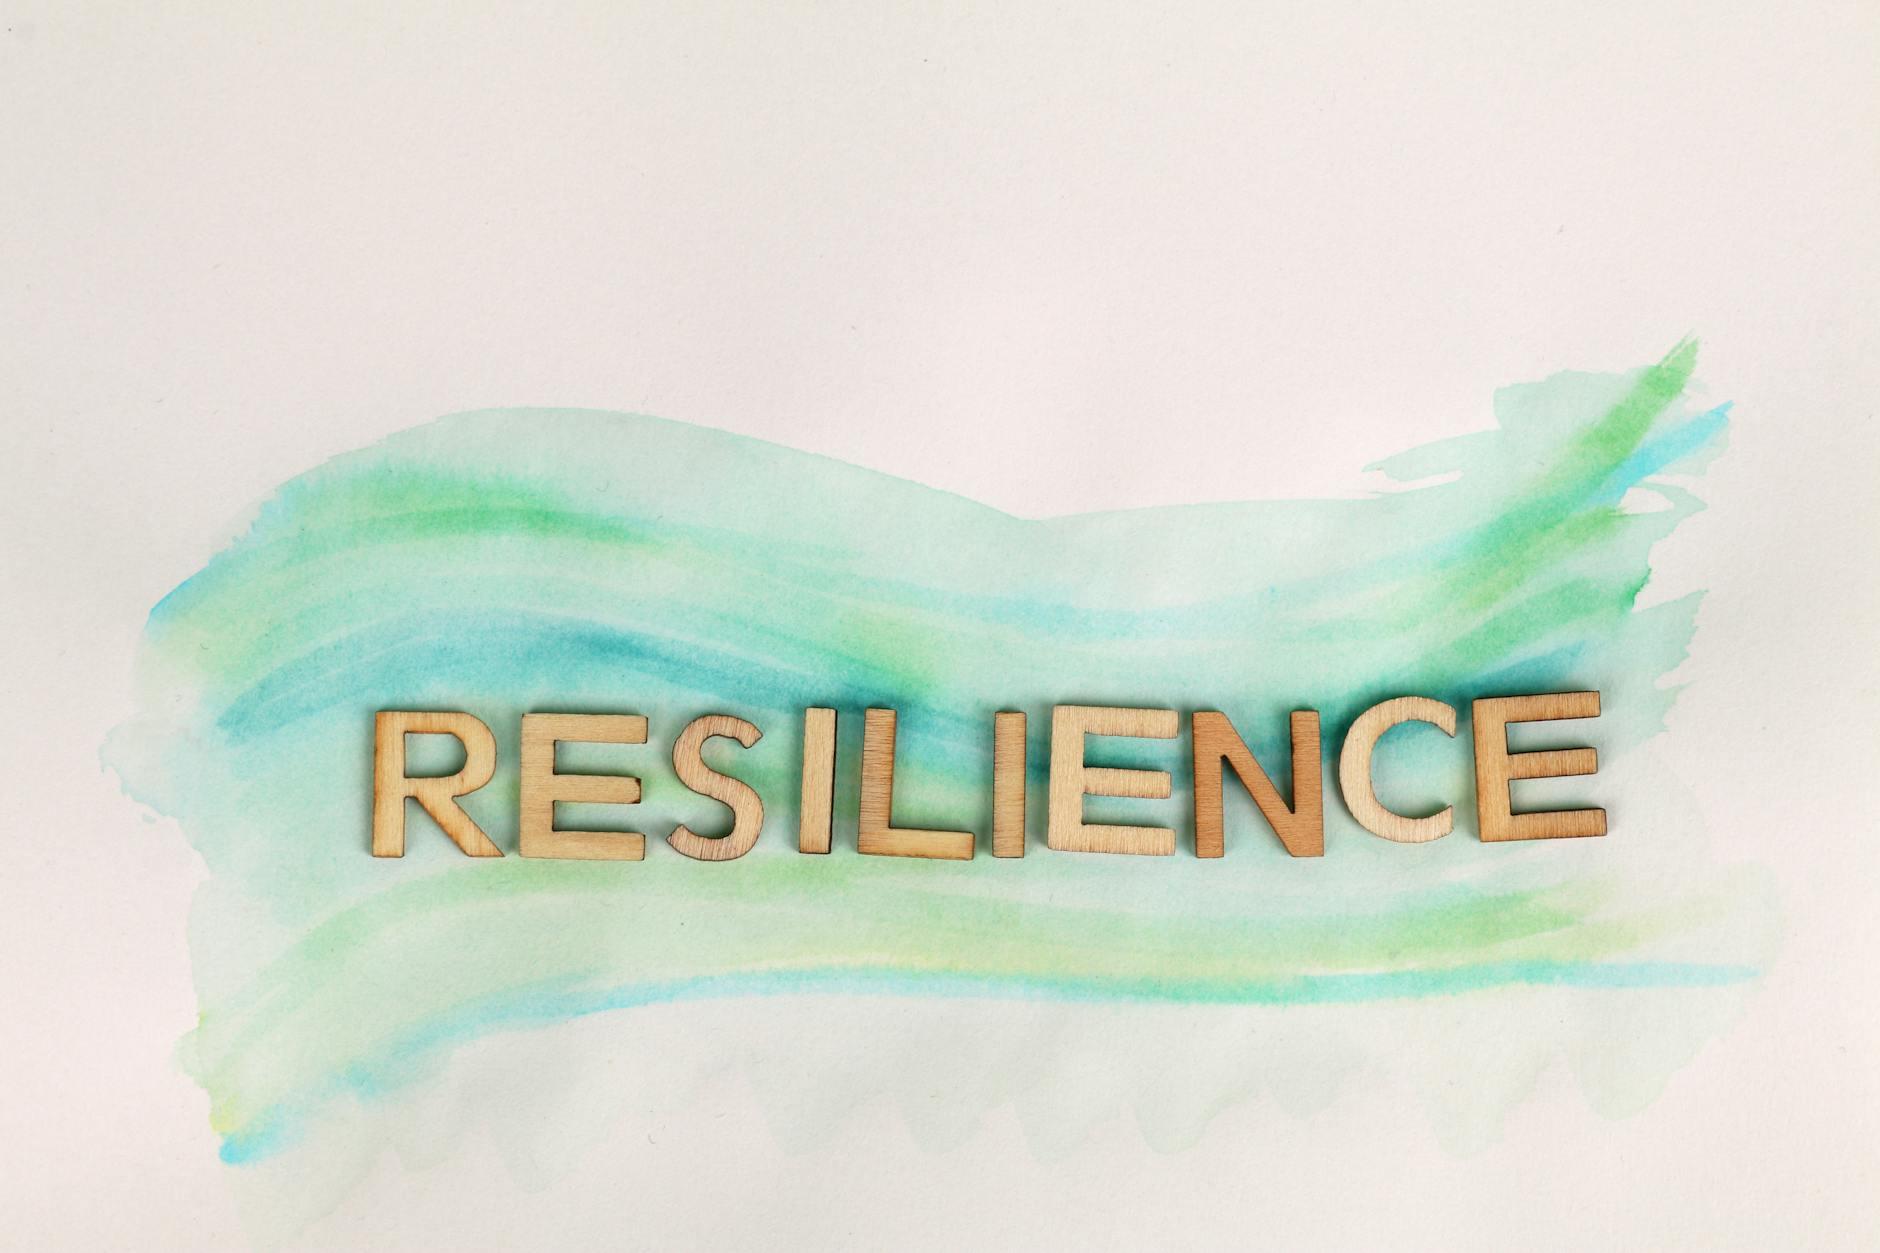 14. Resilience